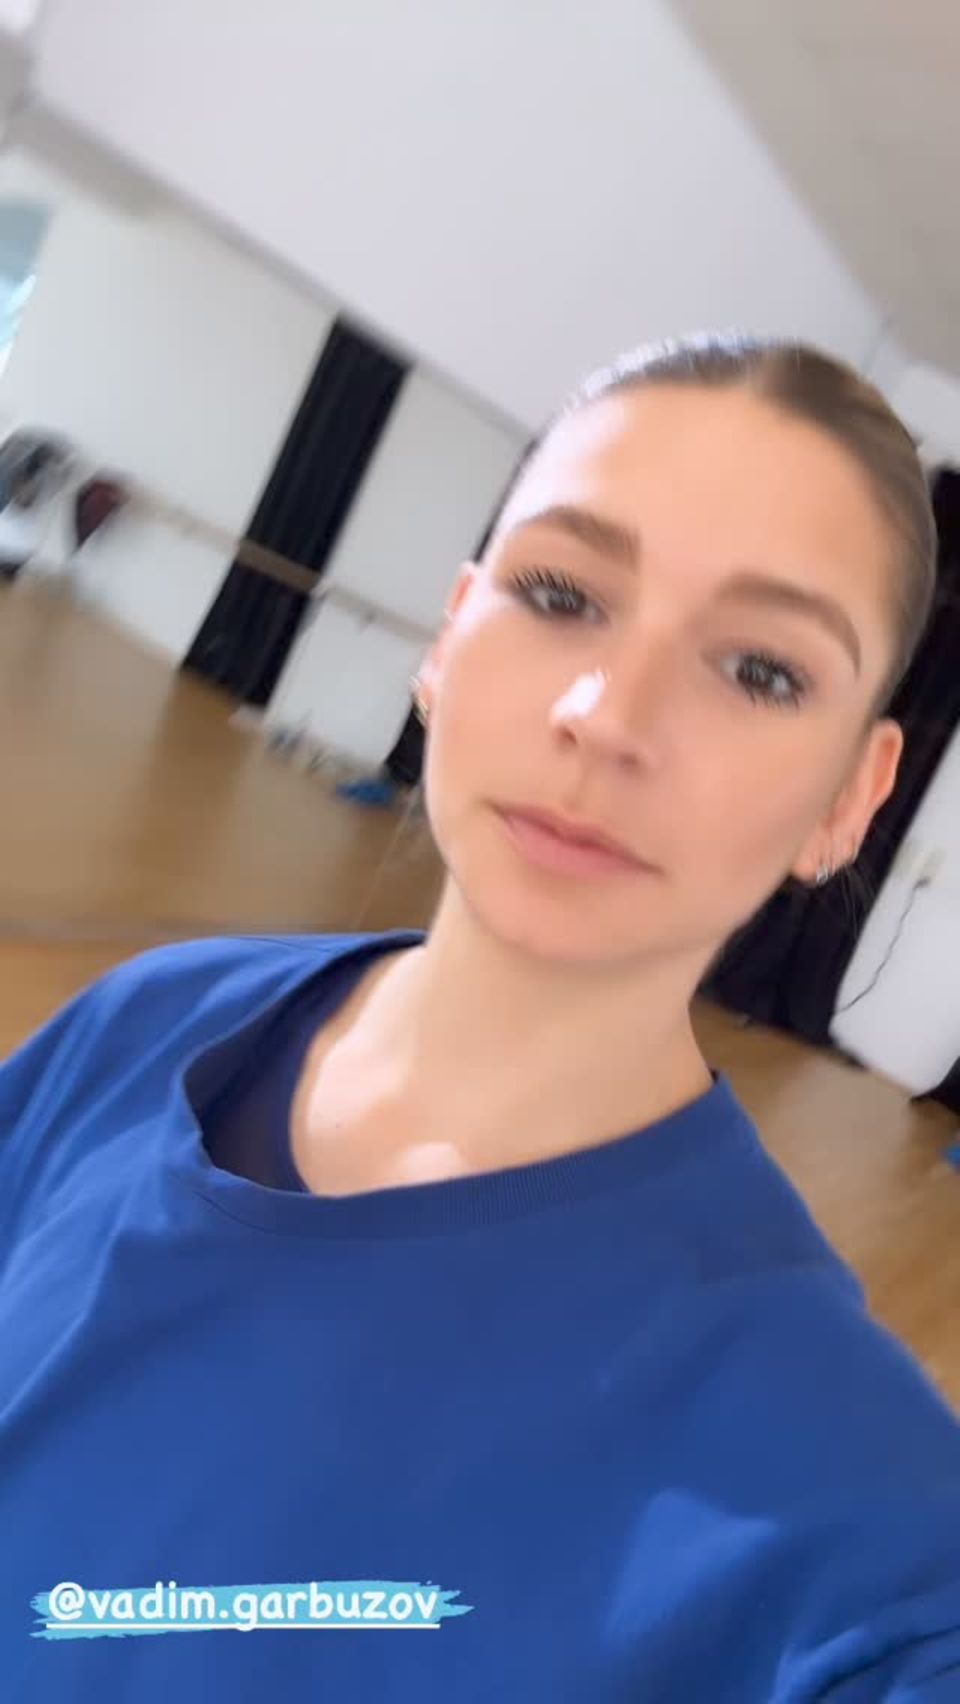 Jana Wosnitza reports on her Instagram story about a funny incident with dance partner Vadim